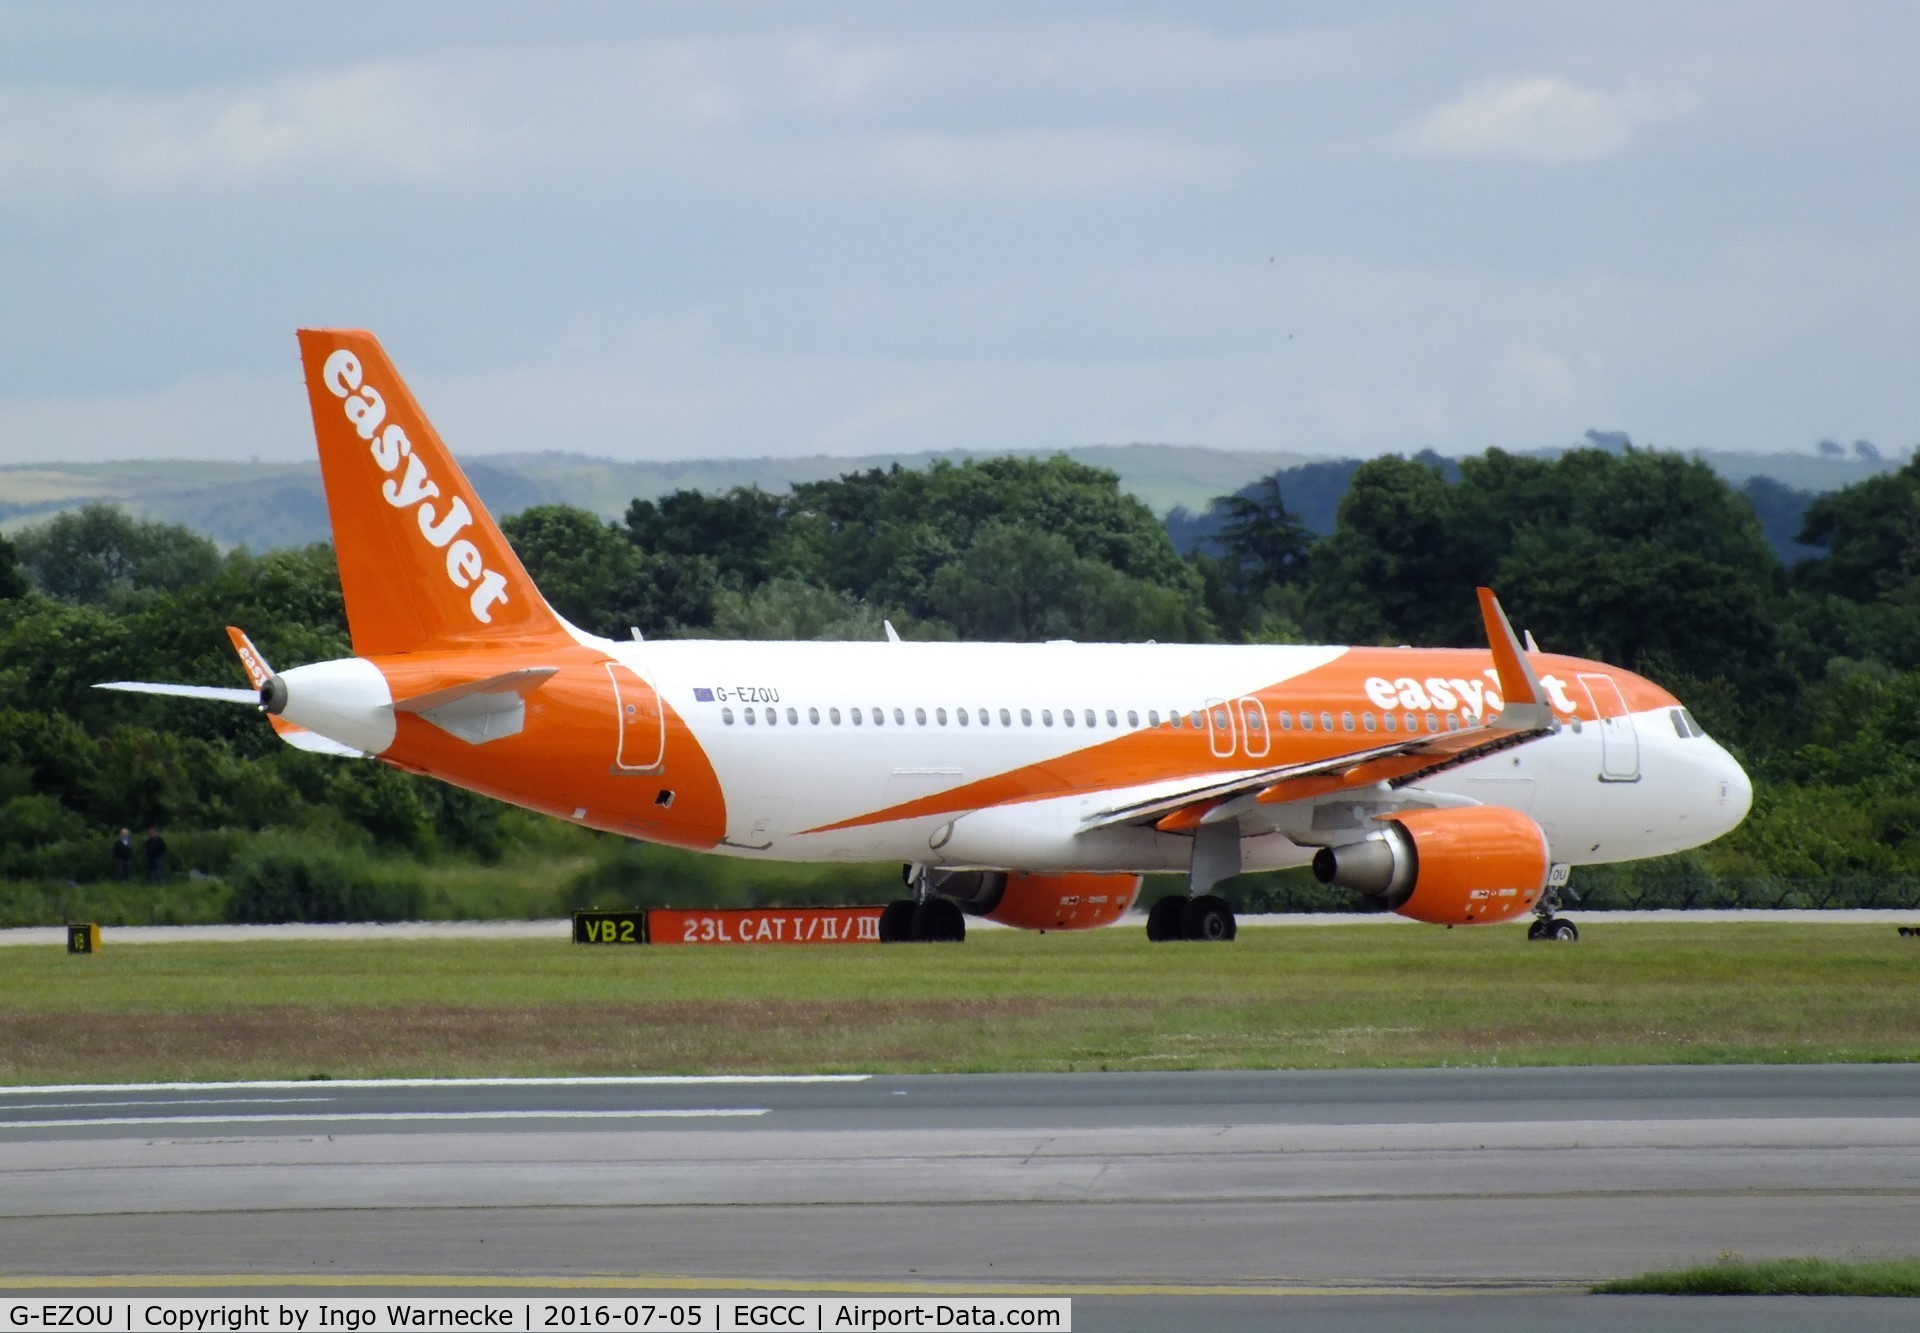 G-EZOU, 2015 Airbus A320-214 C/N 6754, Airbus A320-214 of easyJet at Manchester airport